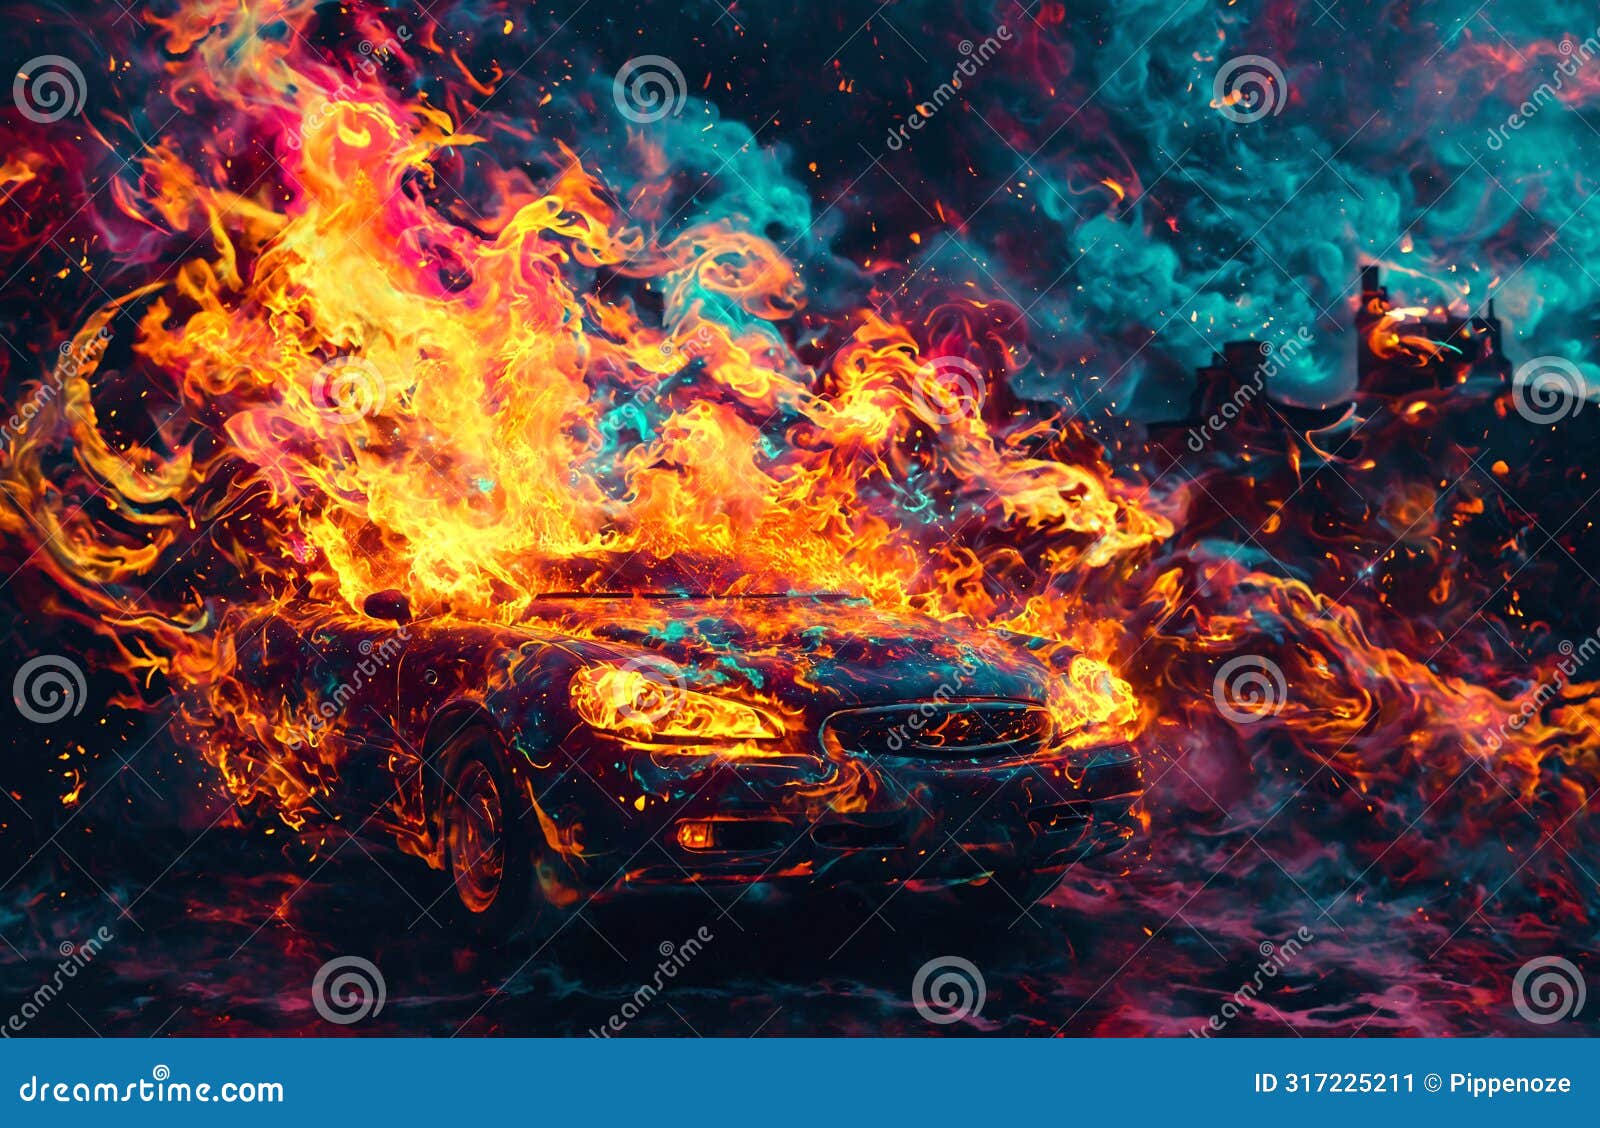 fiery car engulfed in flames with surreal colors